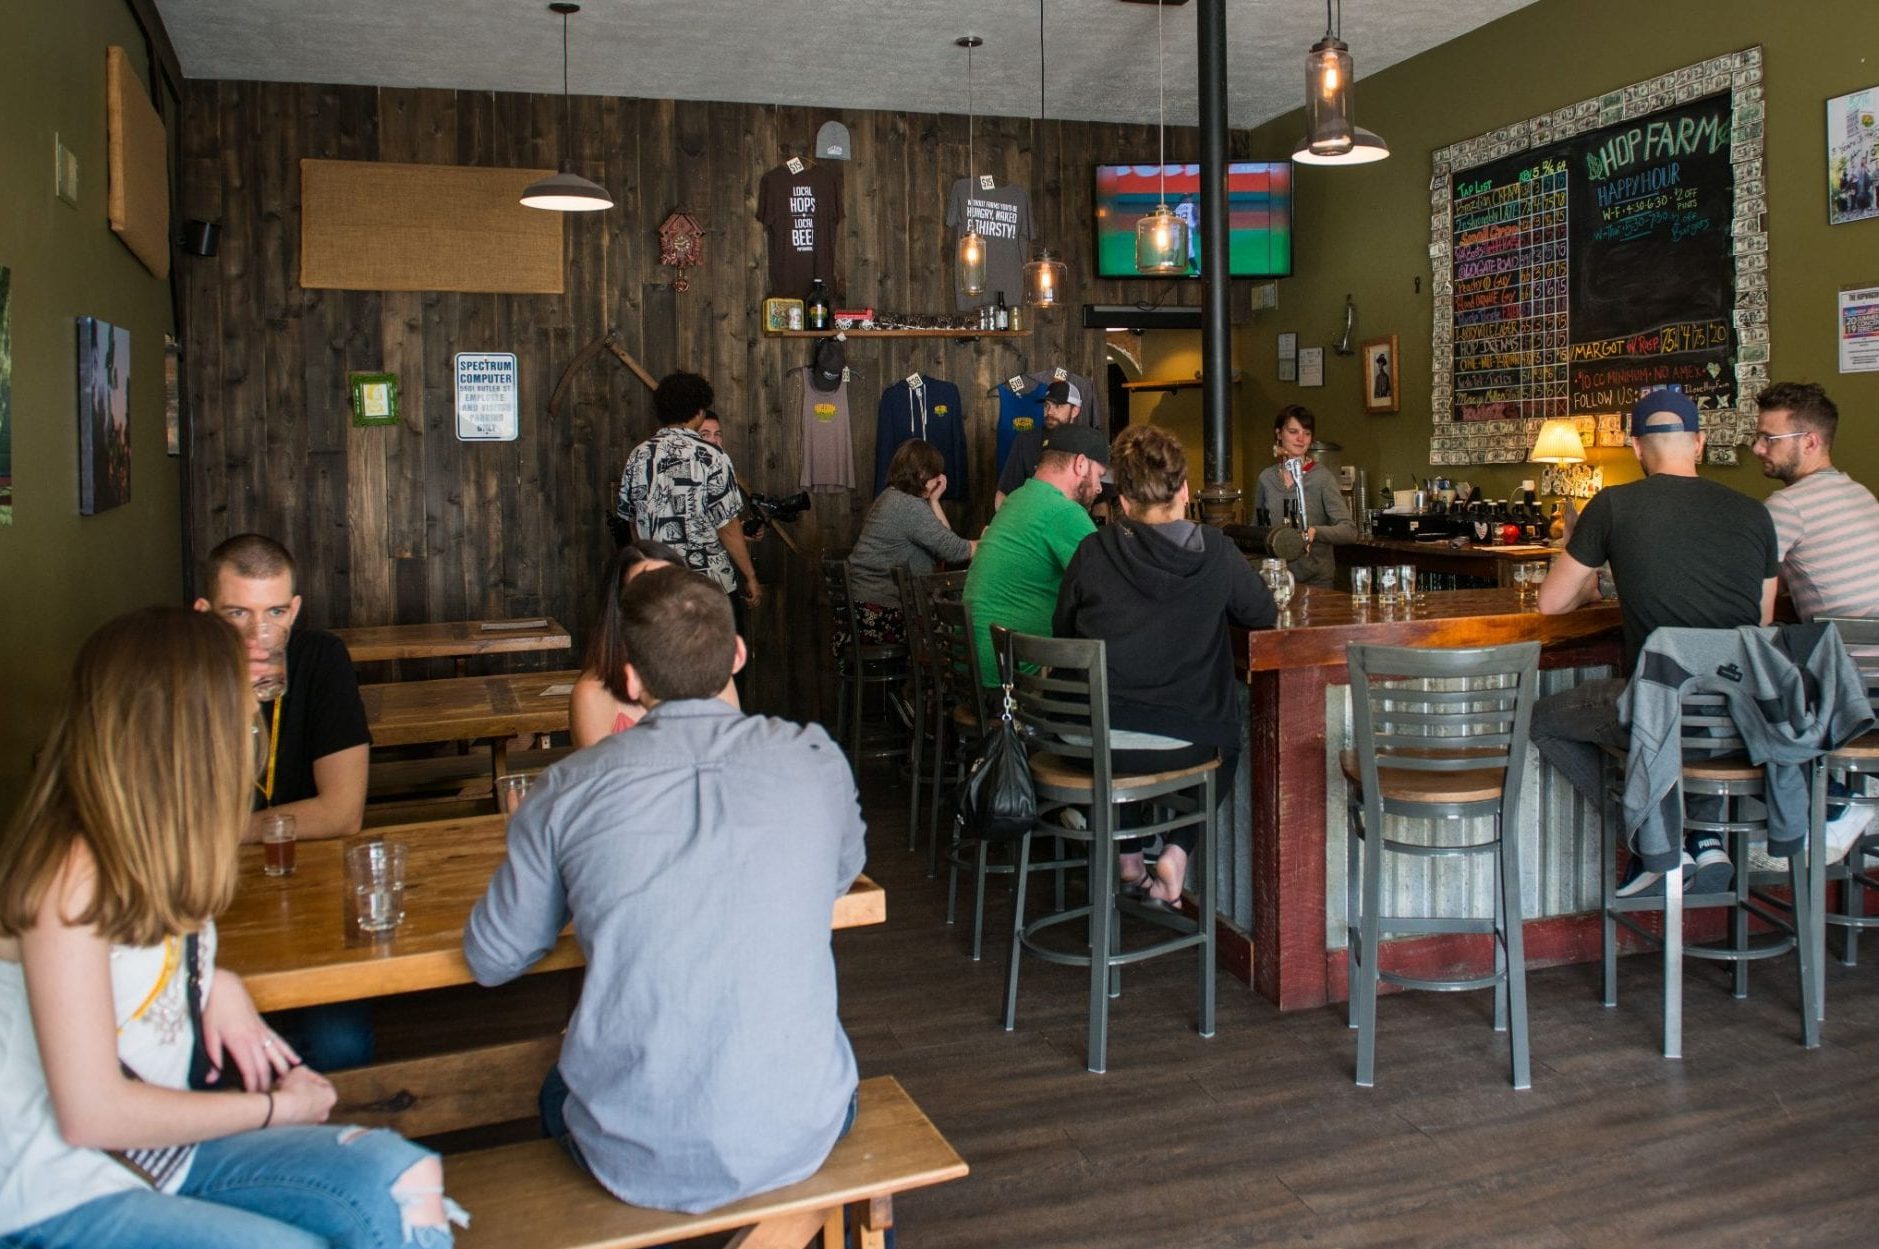 Hop Farm Brewing Company's taproom in Pittsburgh, PA